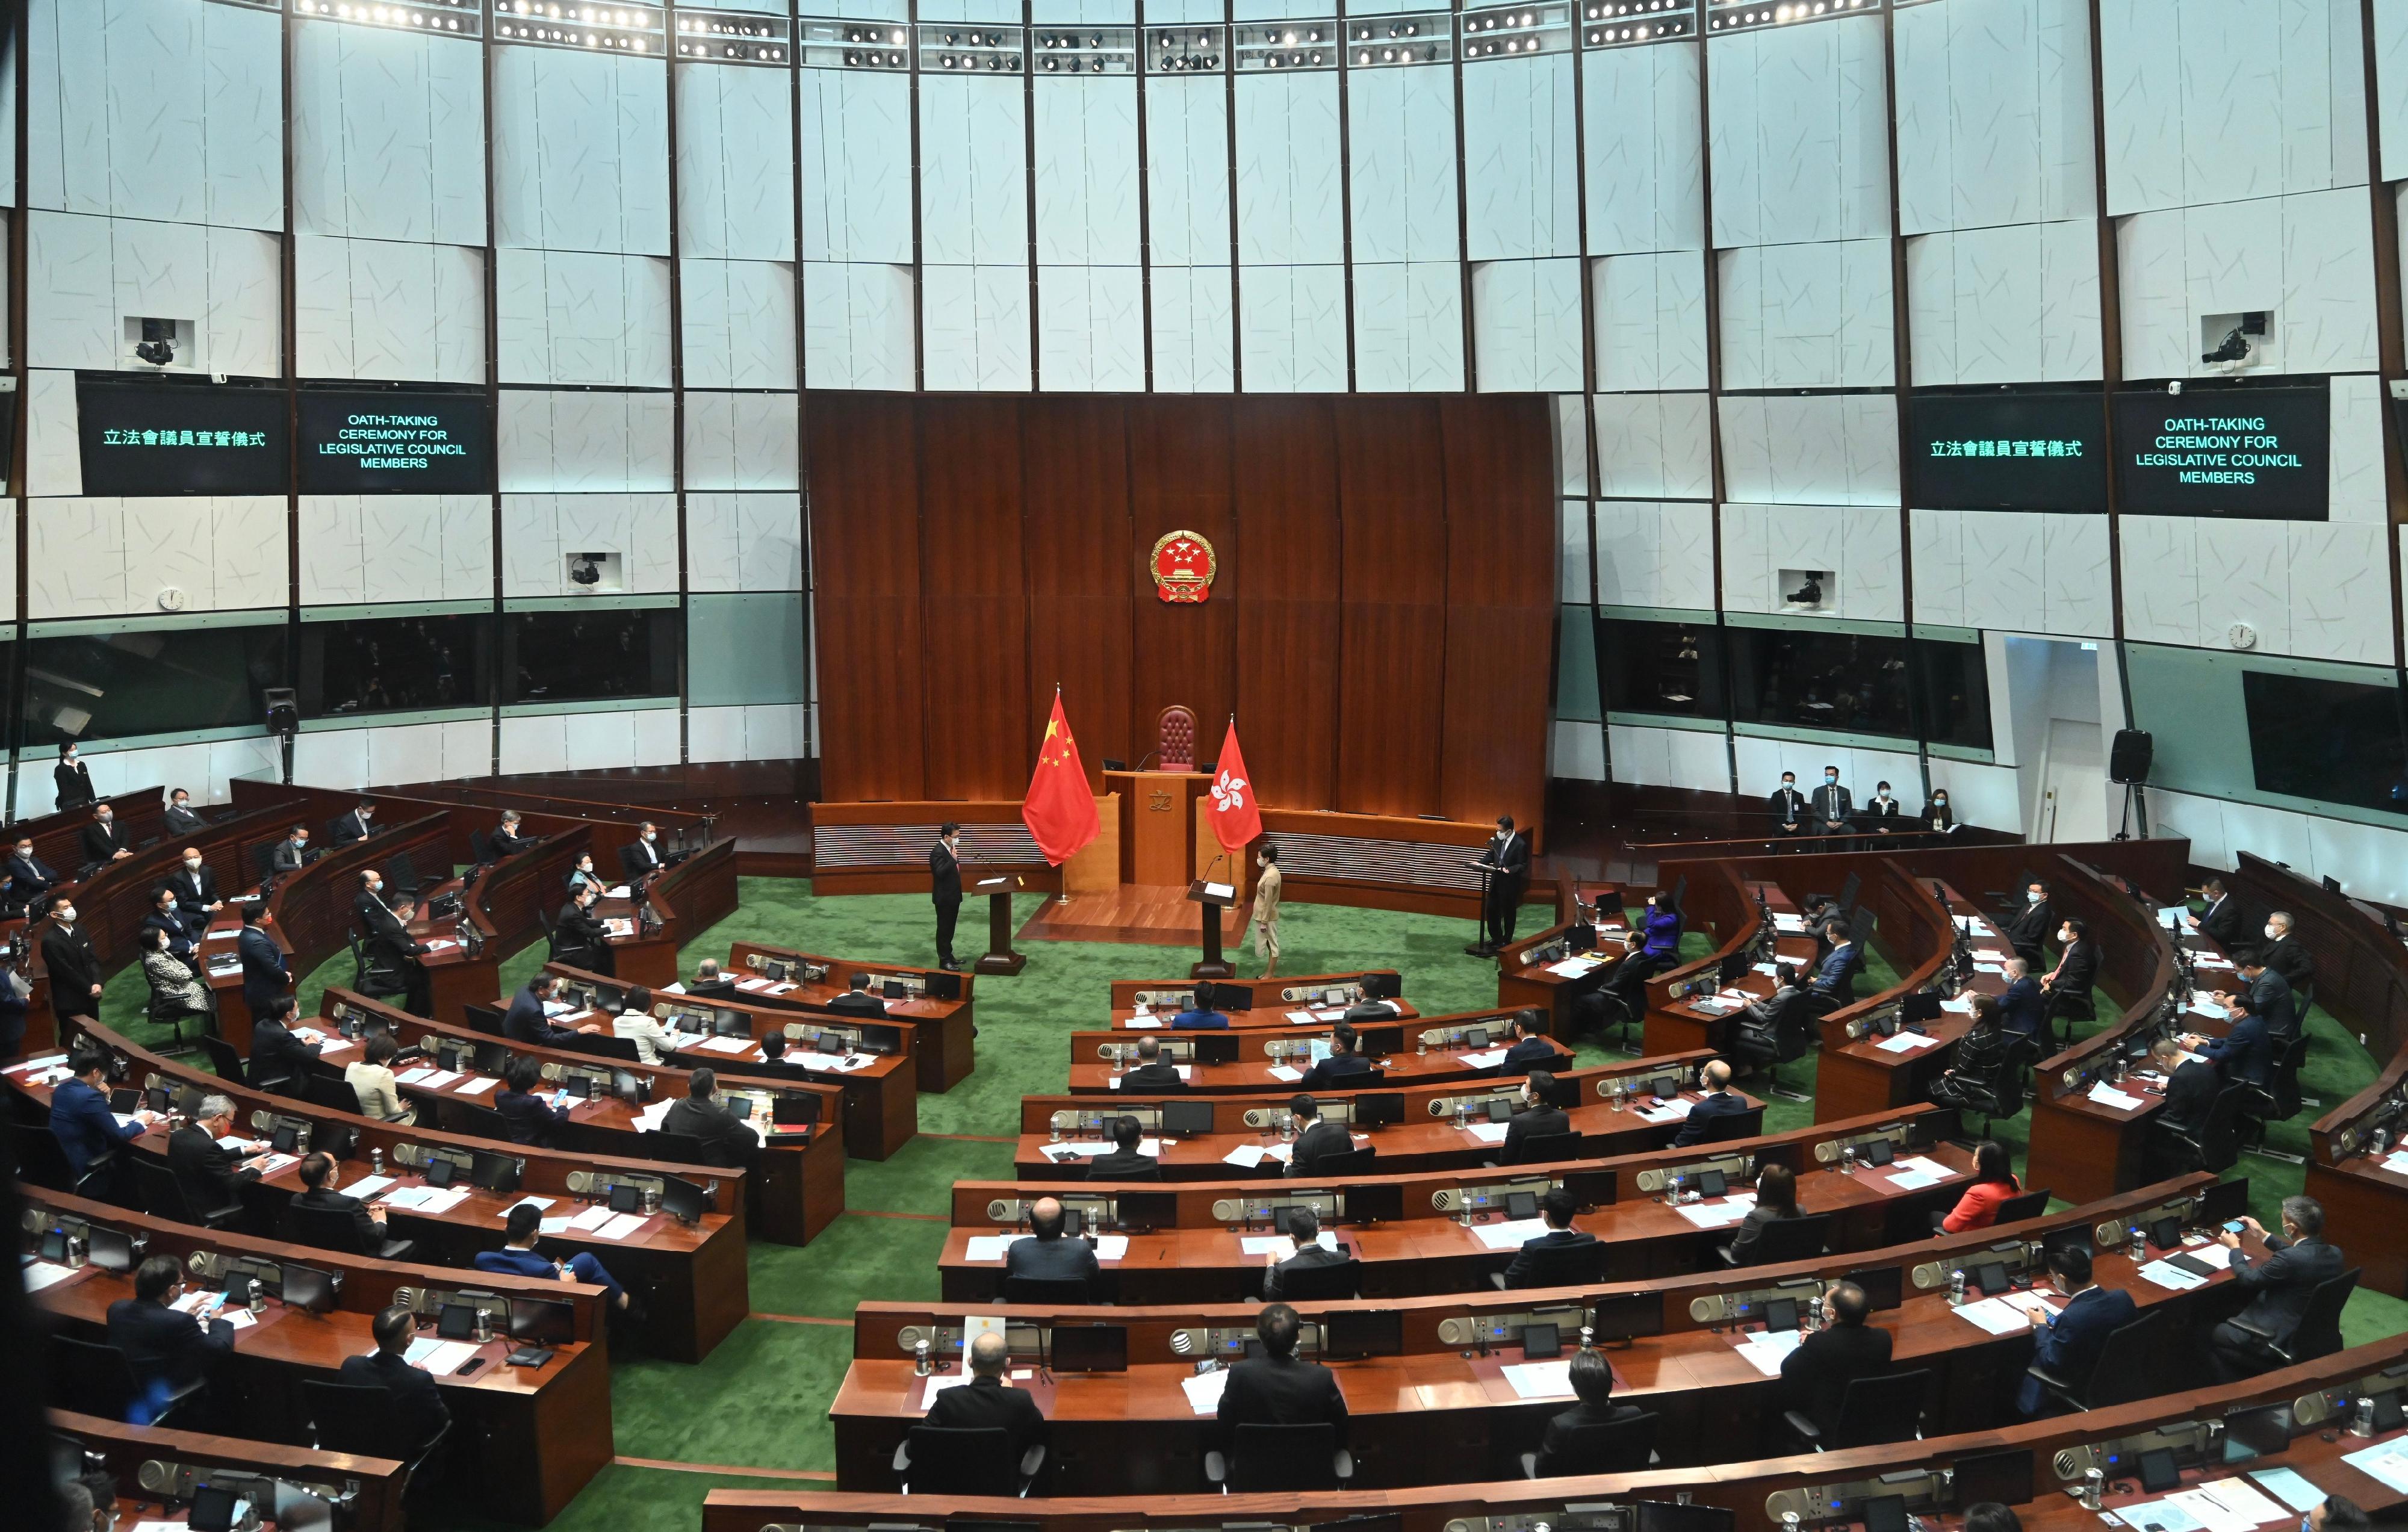 The Chief Executive, Mrs Carrie Lam, administers the oath-taking of members of the seventh-term Legislative Council (LegCo) at the Chamber of the LegCo Complex today (January 3).